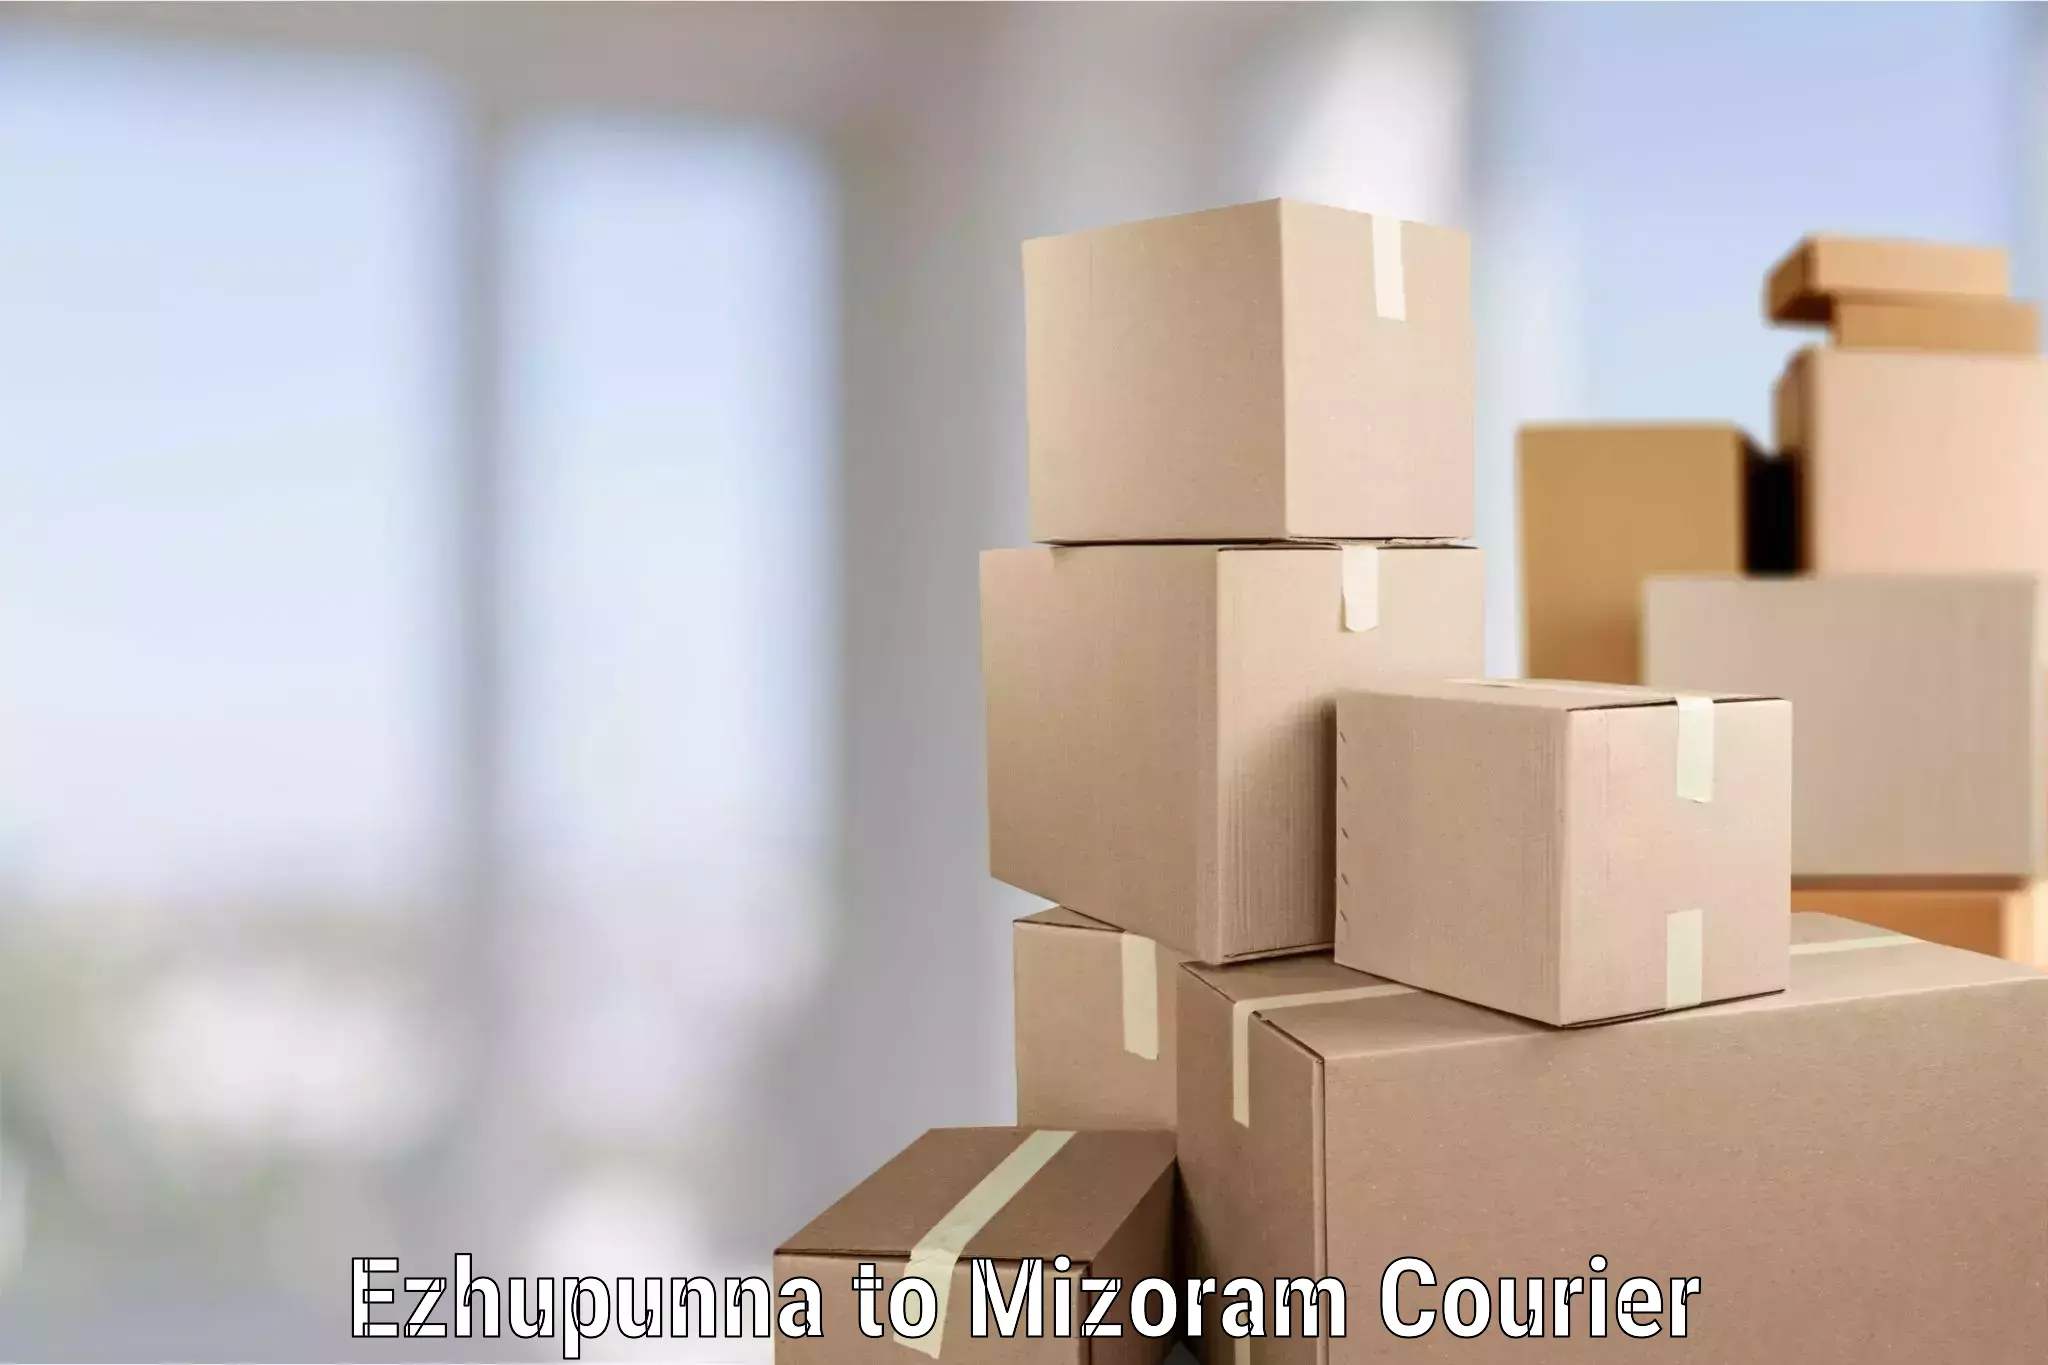 Moving service excellence in Ezhupunna to Mizoram